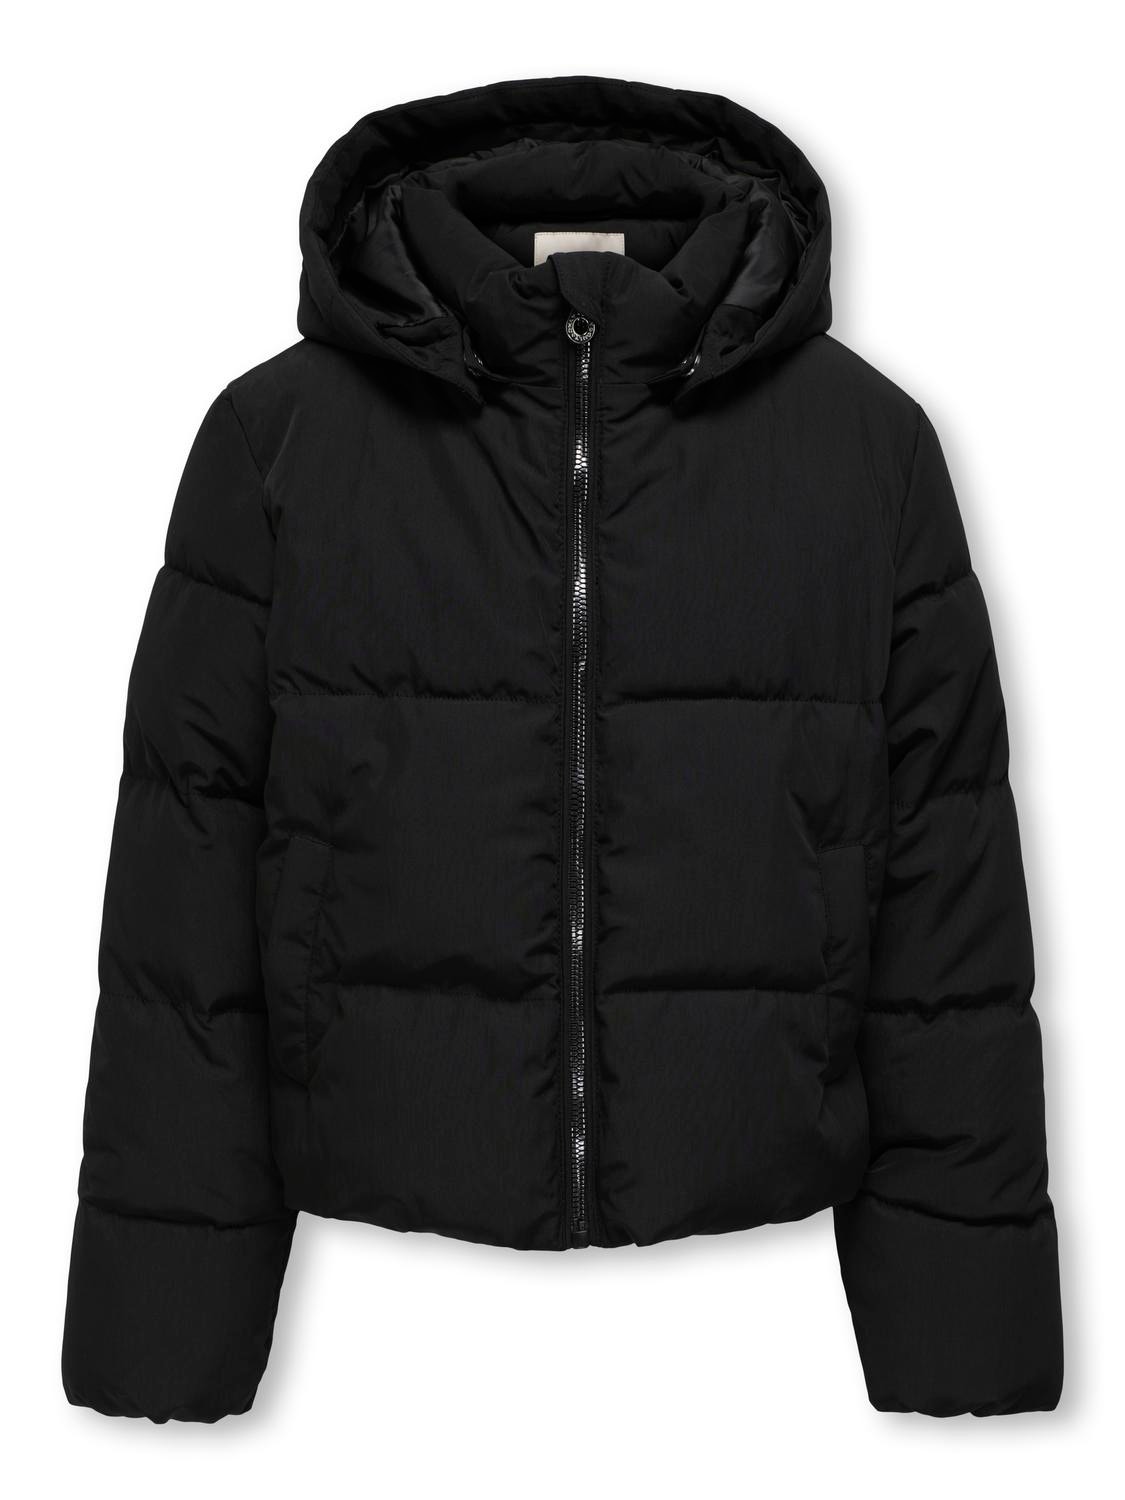 ONLY jacket with high collar -Black - 15306404